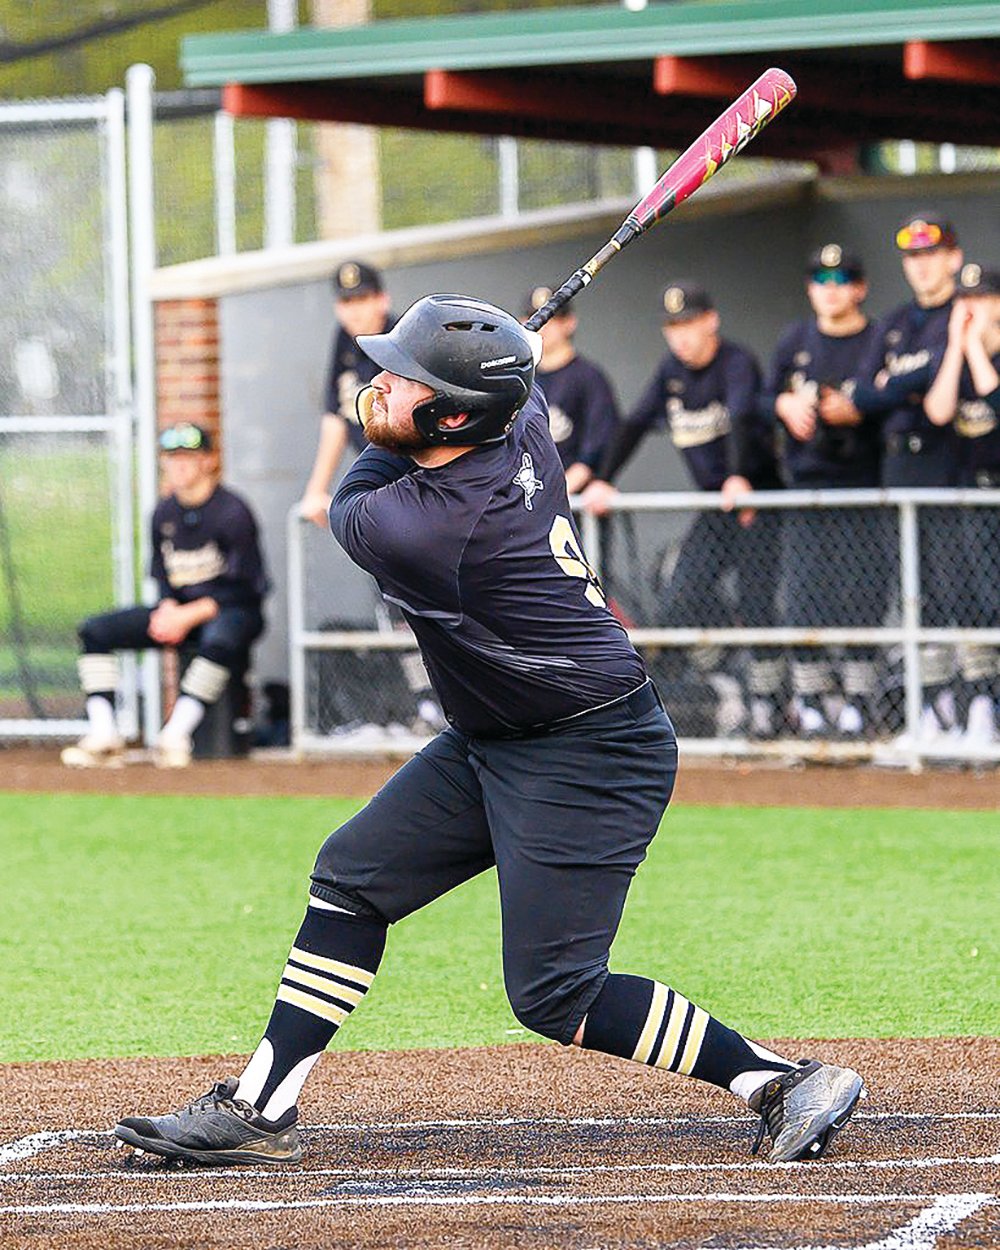 Cairo’s Jack Prewett bats during last Friday’s game between the Bearcats and Community. Prewett tripled and had two RBI as Cairo blanked Community, 9-0.